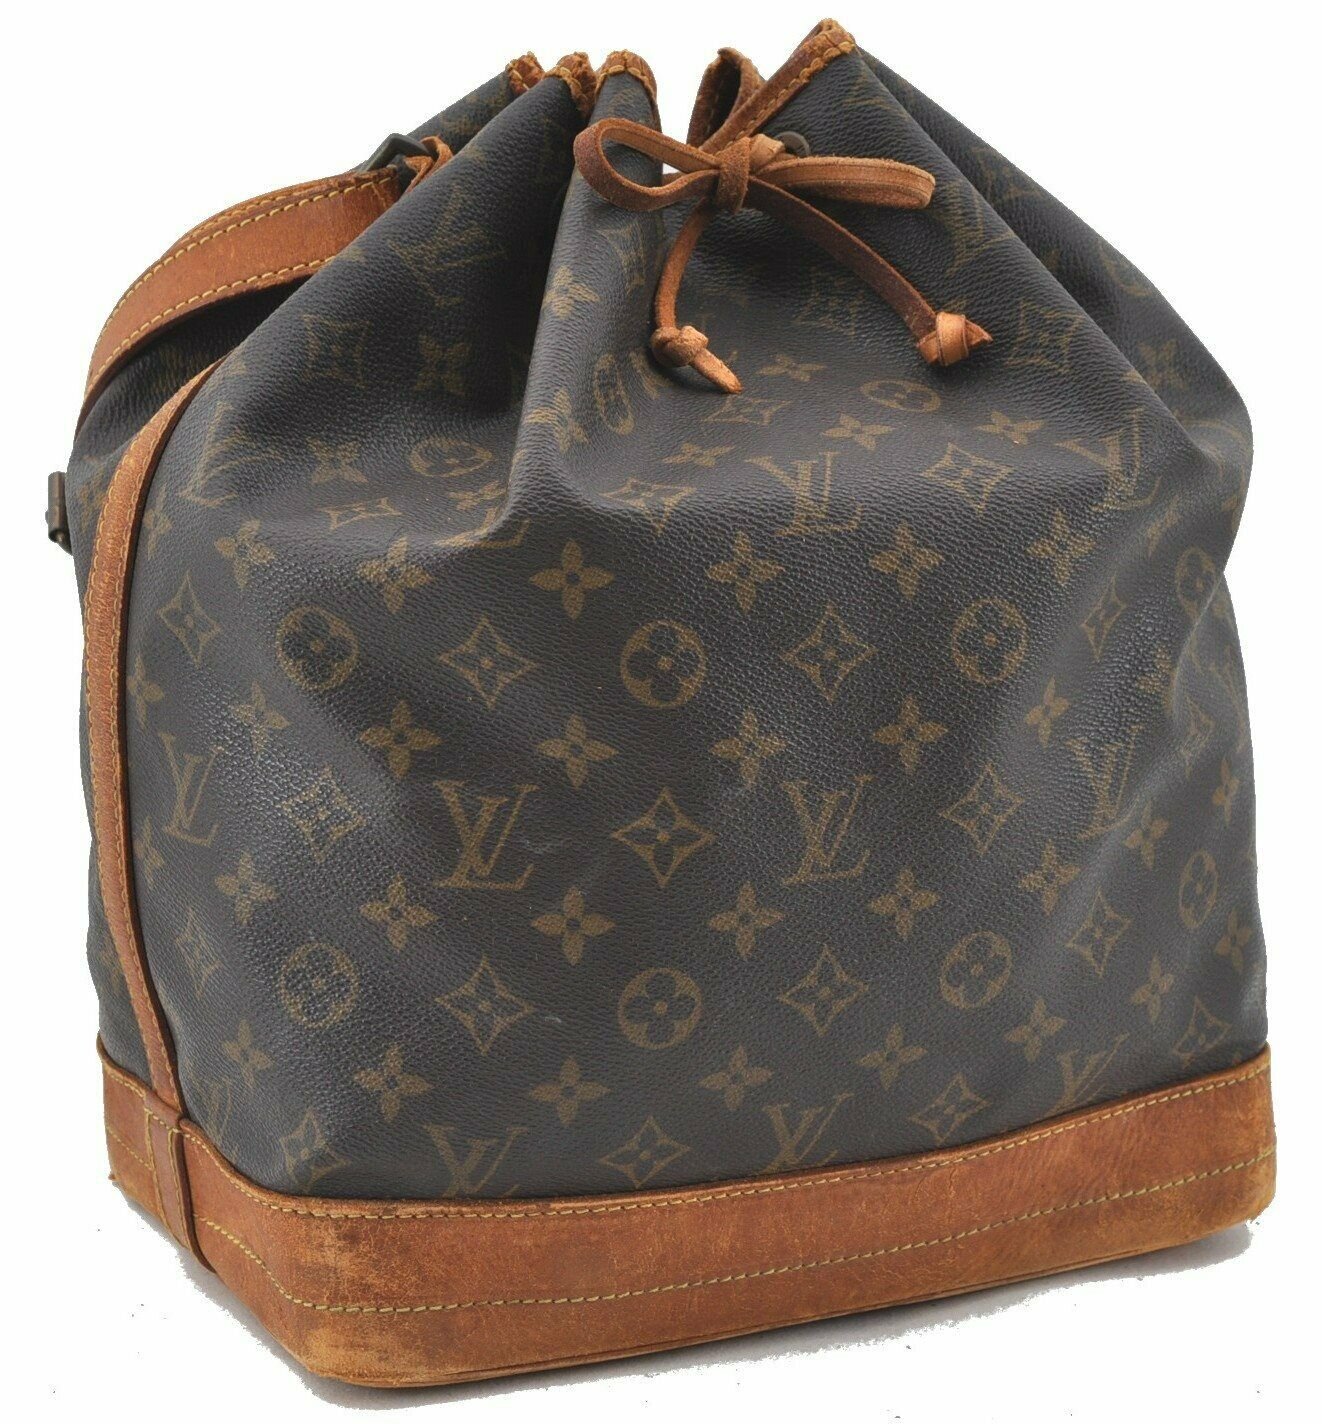 What Louis Vuitton bag is this? Vintage bag - Purchase year